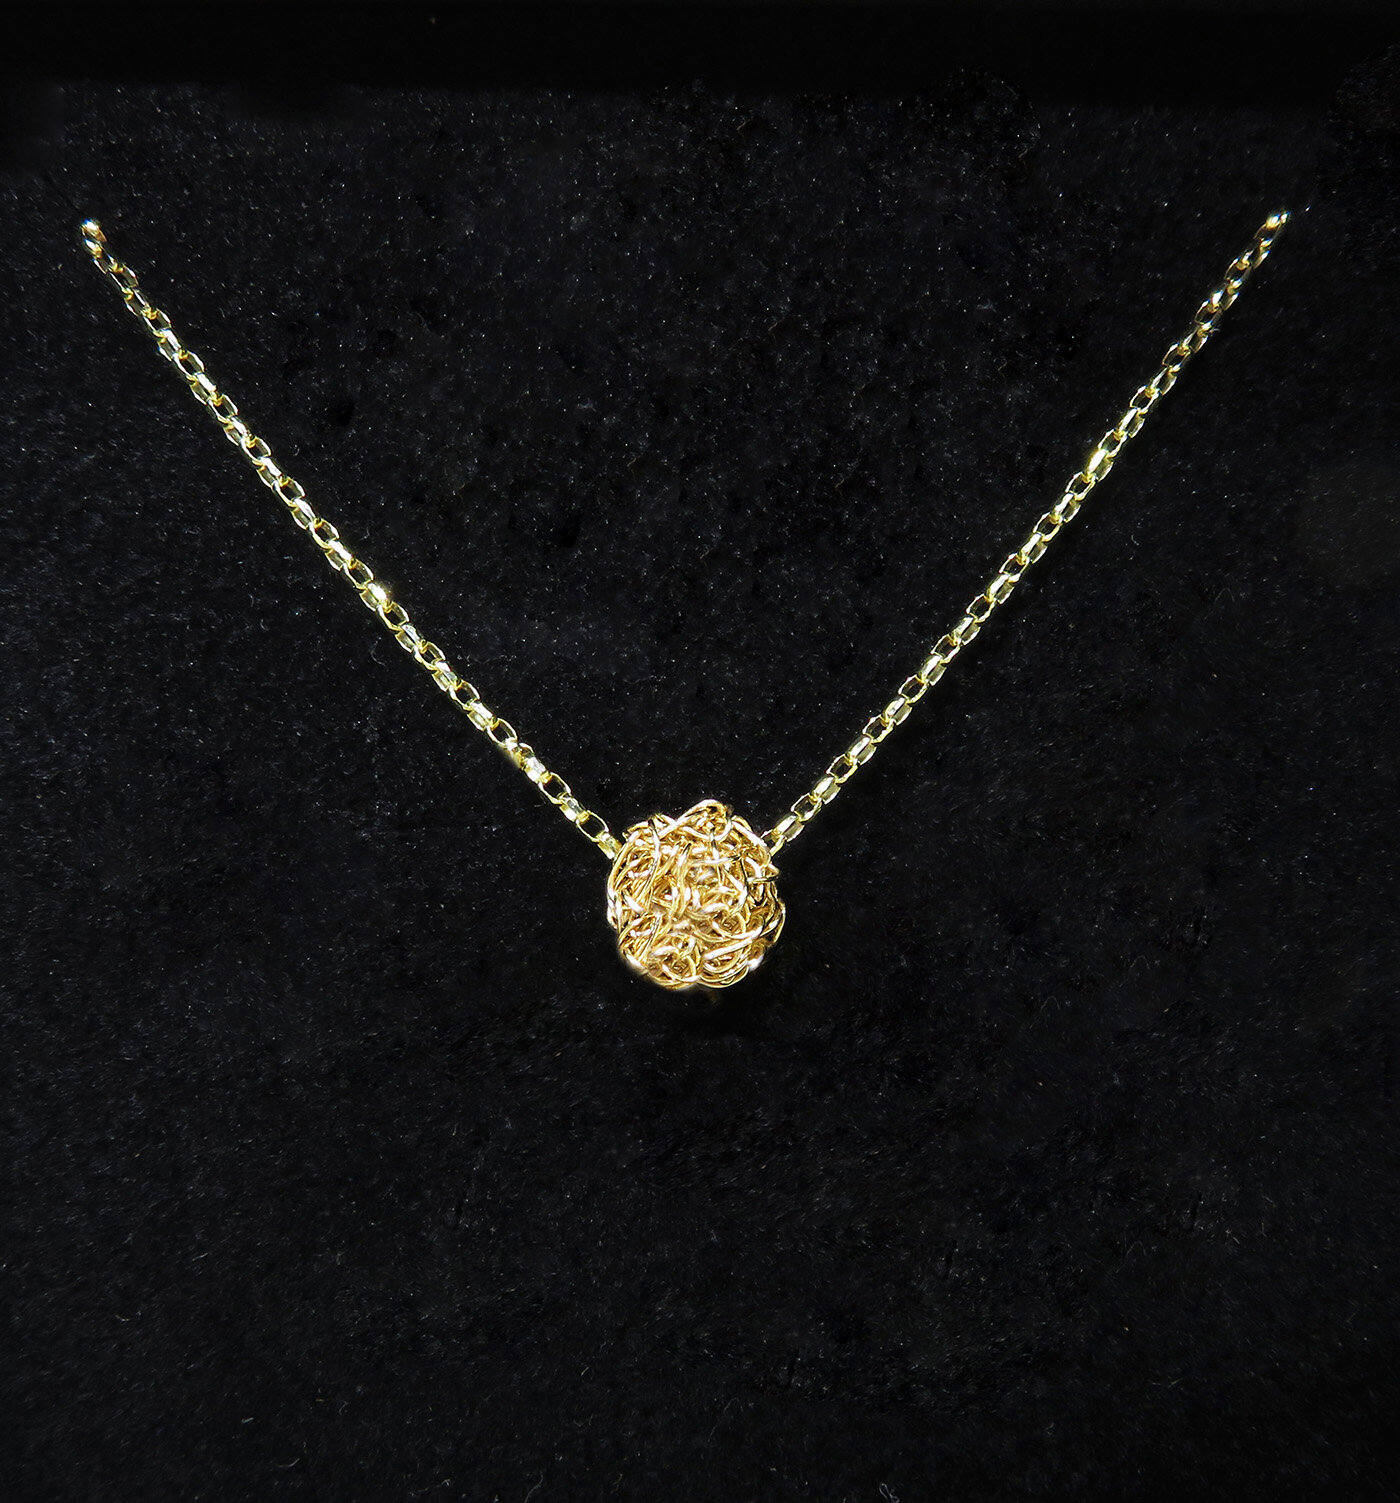 Hand Crochet Gold Necklace